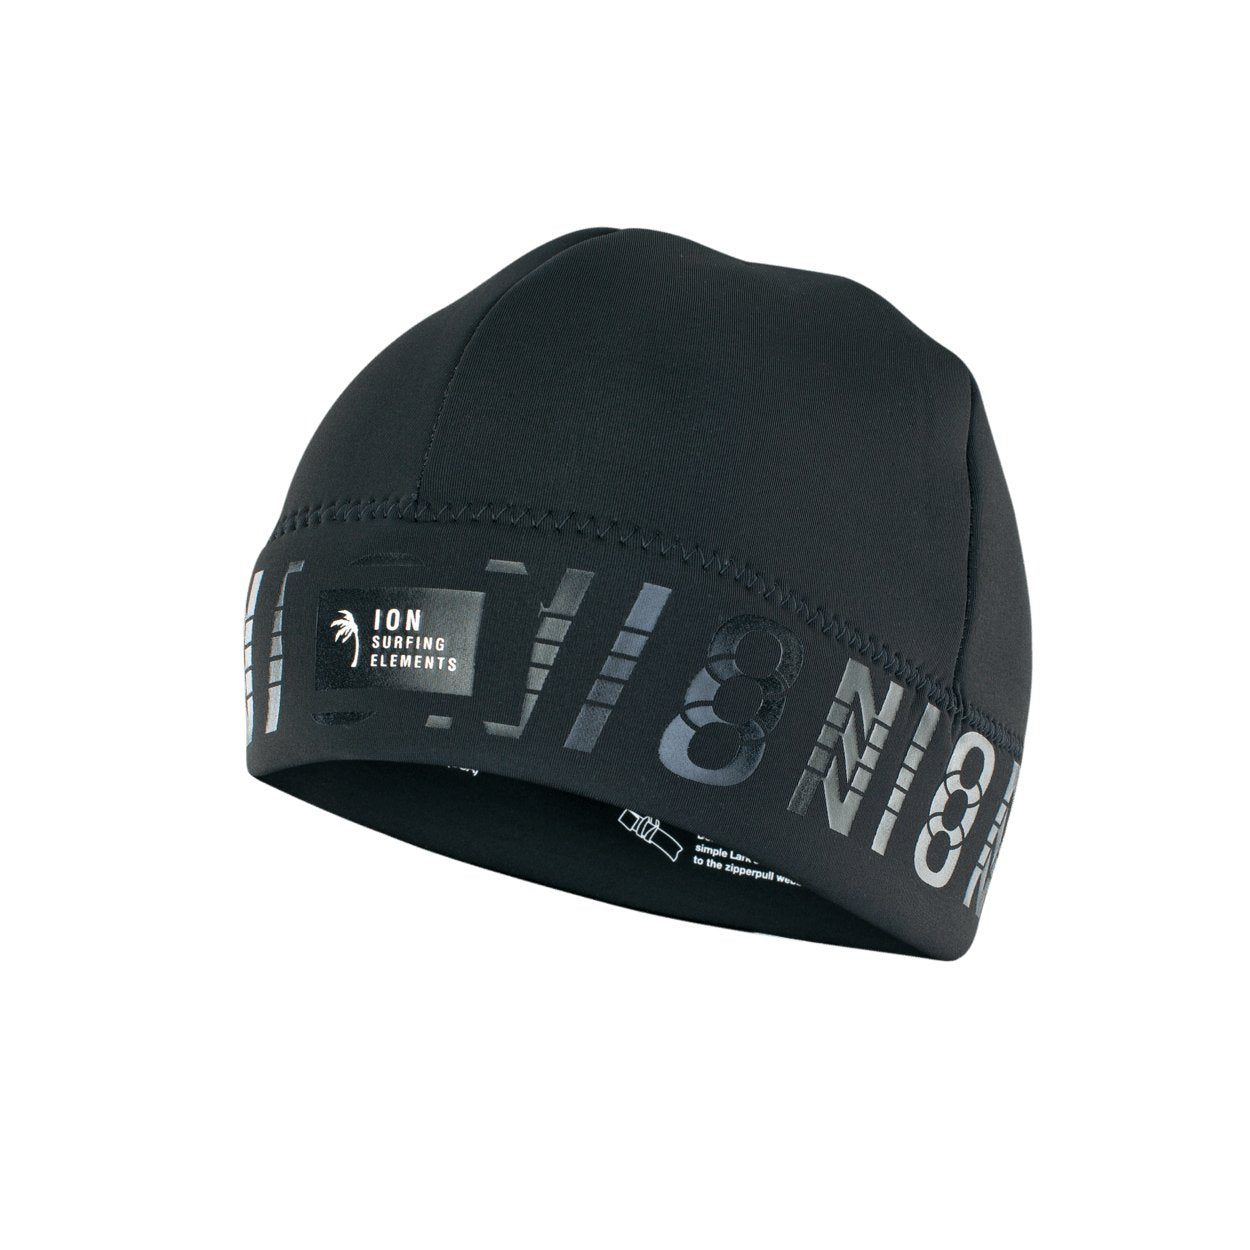 ION Neo Logo Beanie 2022 - Worthing Watersports - 9010583053097 - Neo Accessories - ION Water